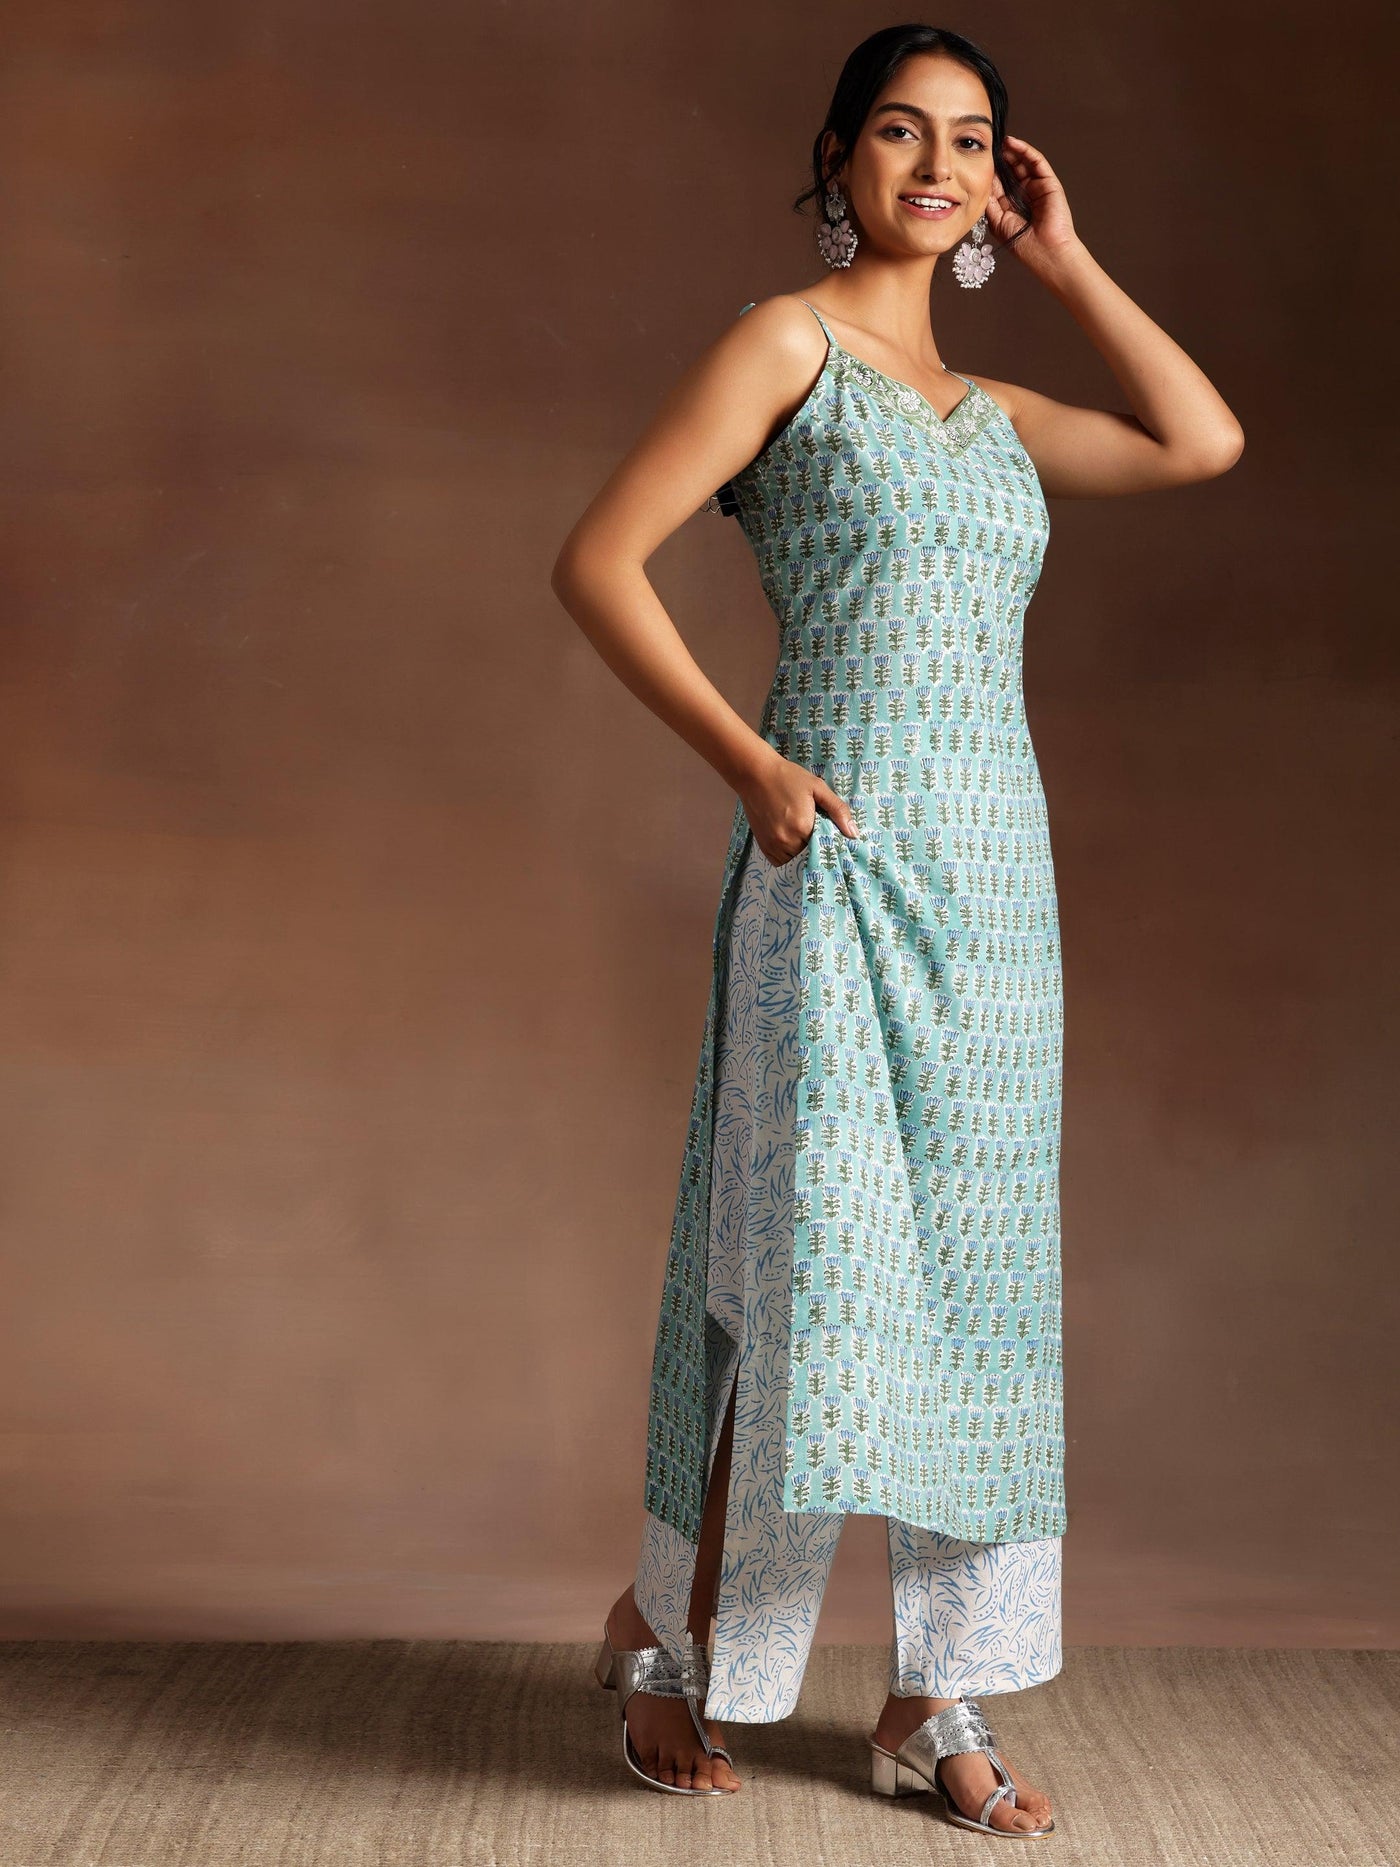 Green Printed Cotton Straight Suit With Dupatta - Libas